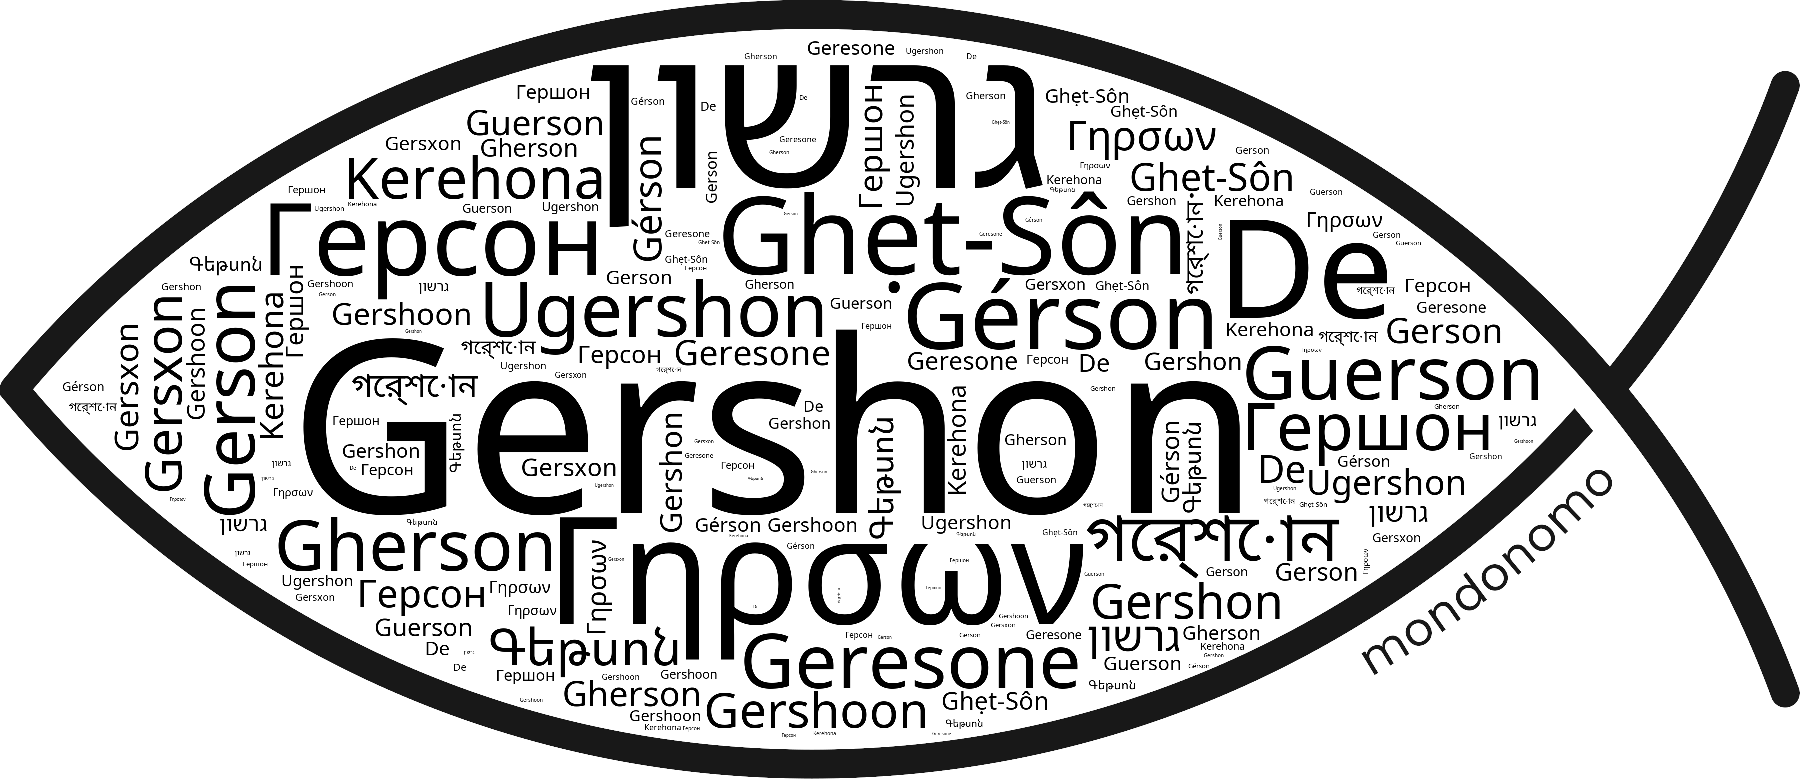 Name Gershon in the world's Bibles